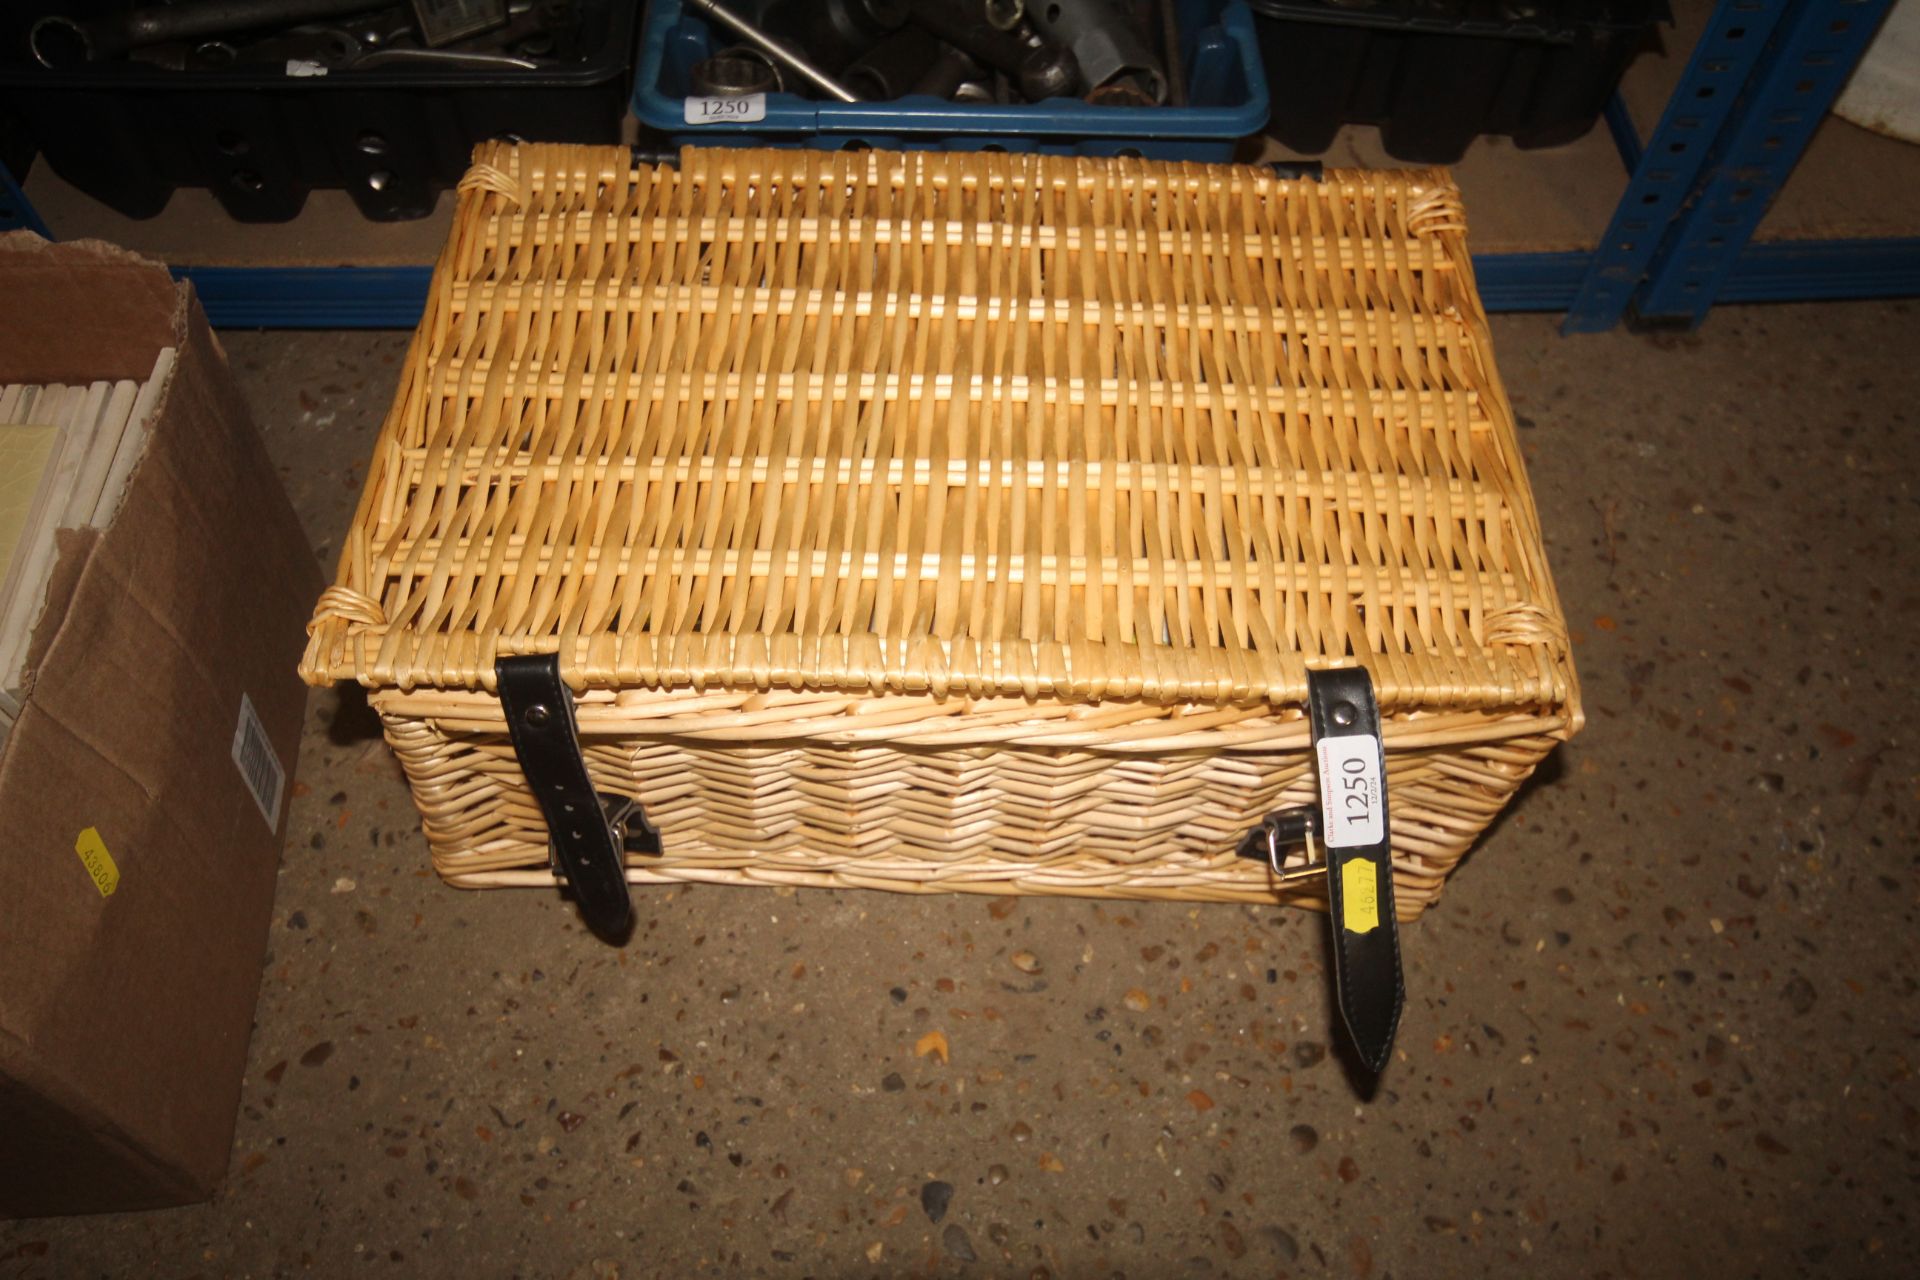 A wicker hamper basket and quantity of various gol - Image 2 of 2